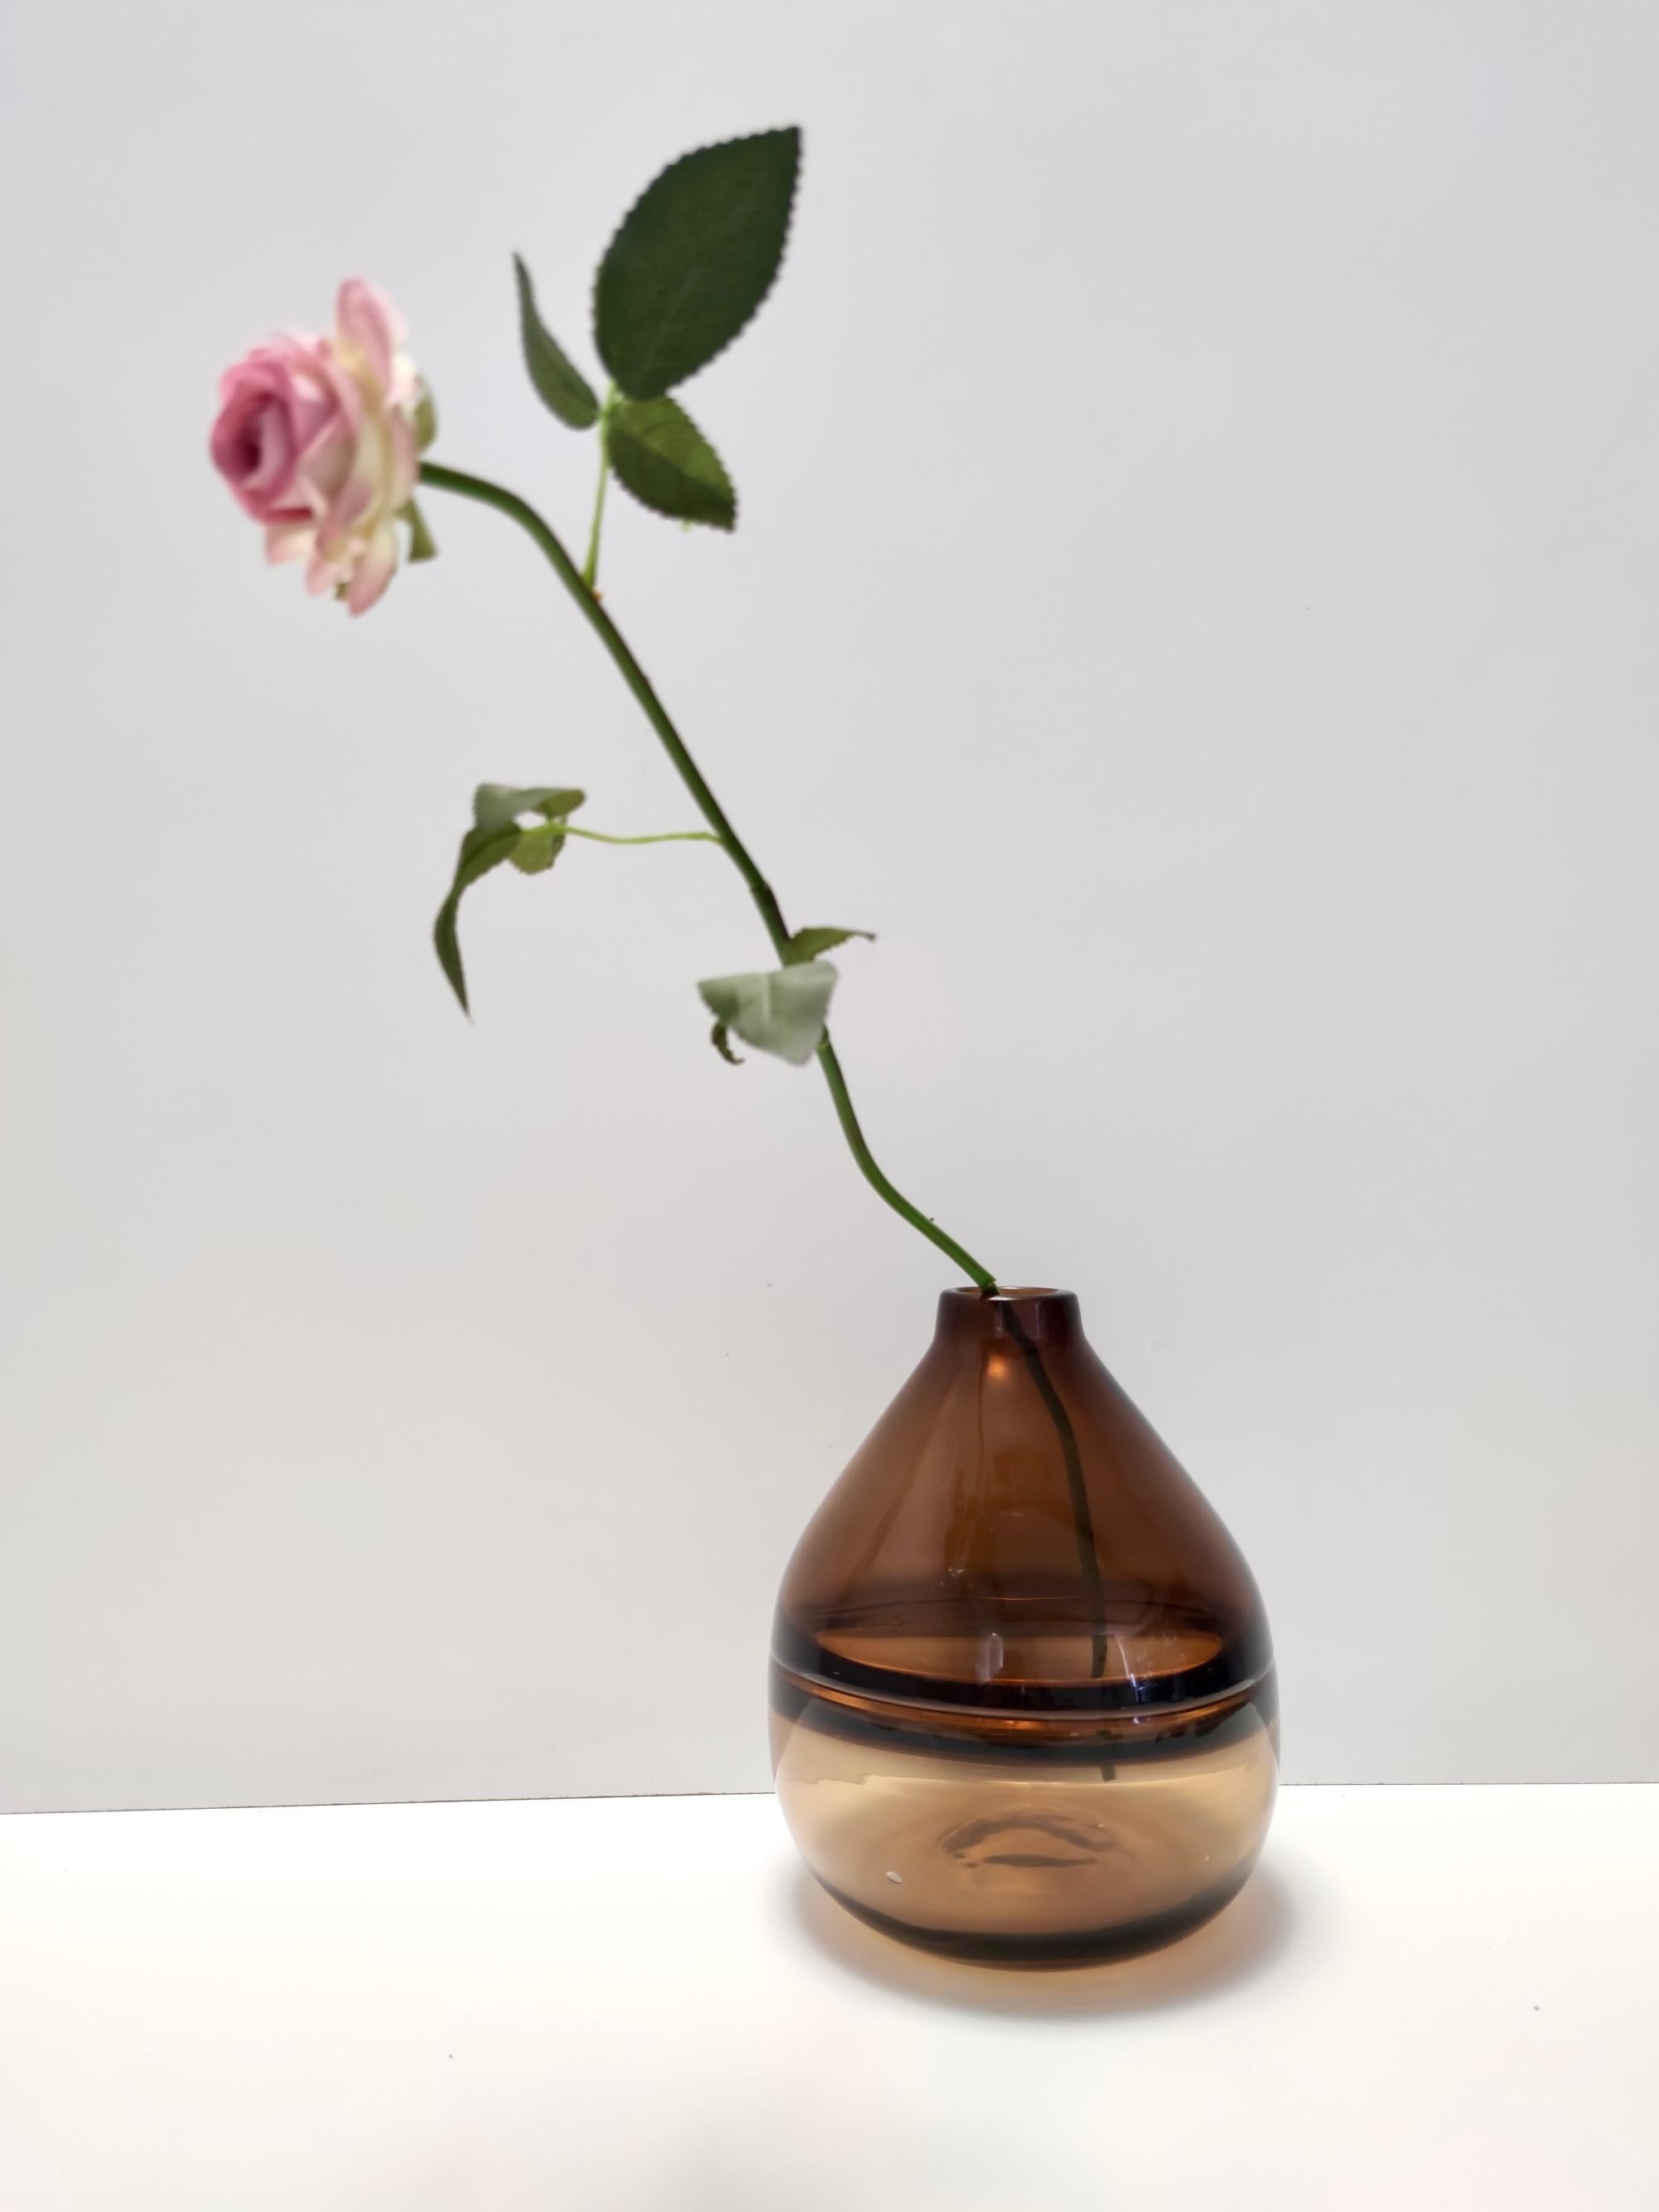 Made in Italy, 1970s-1980s. 
This vase is made in incalmo Murano glass, which has been hand blown with two different shades of brown.
It is a vintage item, therefore it might show slight traces of use, but it can be considered as in excellent